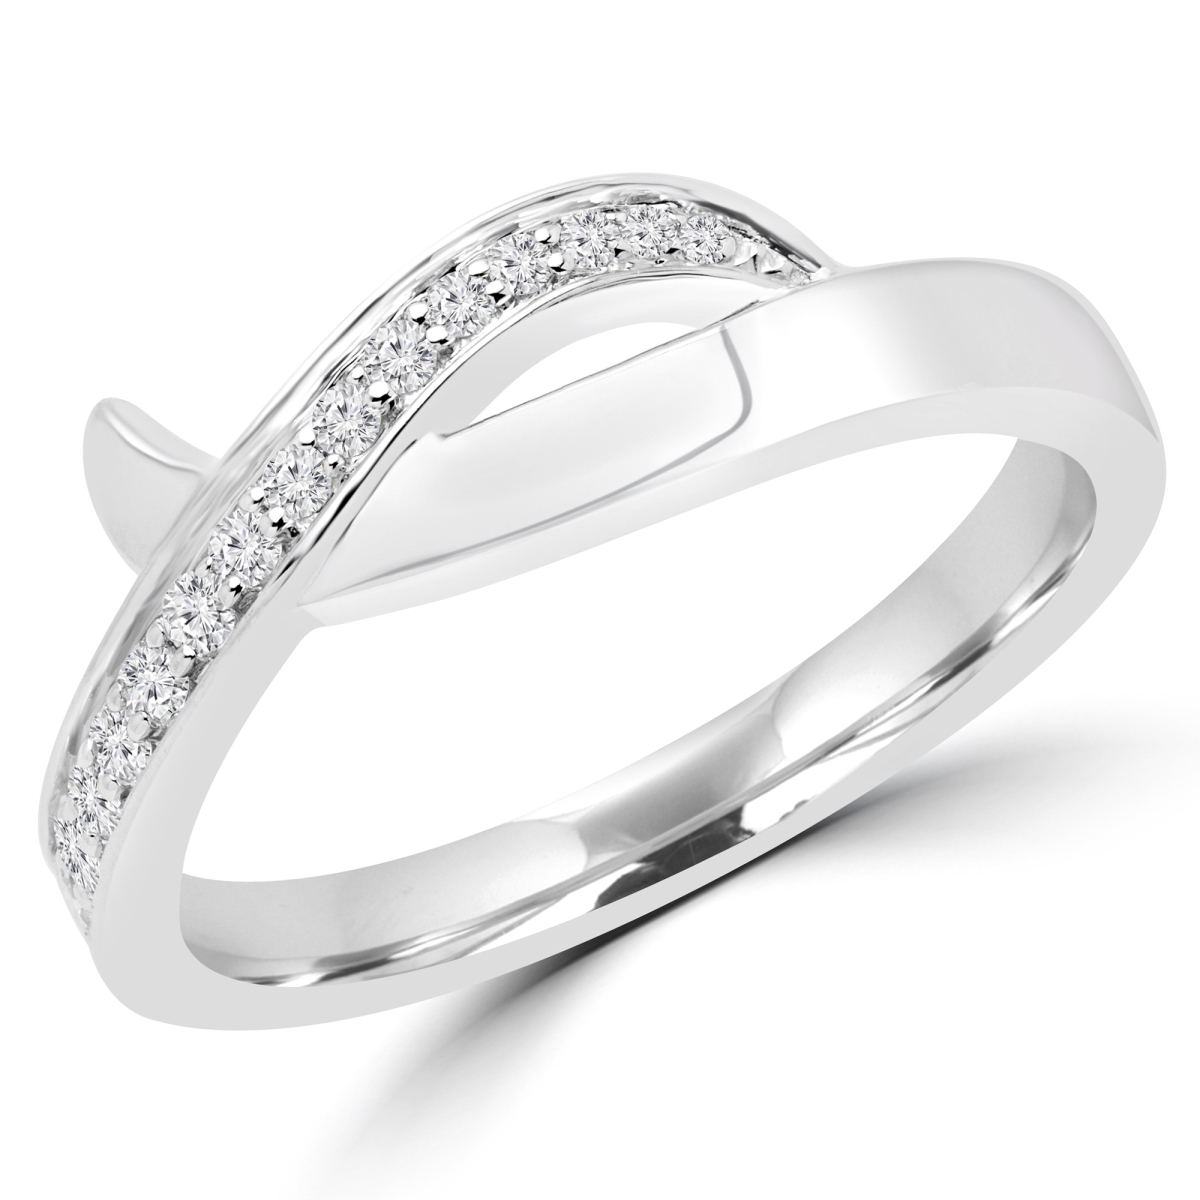 Picture of Majesty Diamonds MDR170054-3 0.16 CTW Round Diamond Cocktail Ring in 14K White Gold - 3